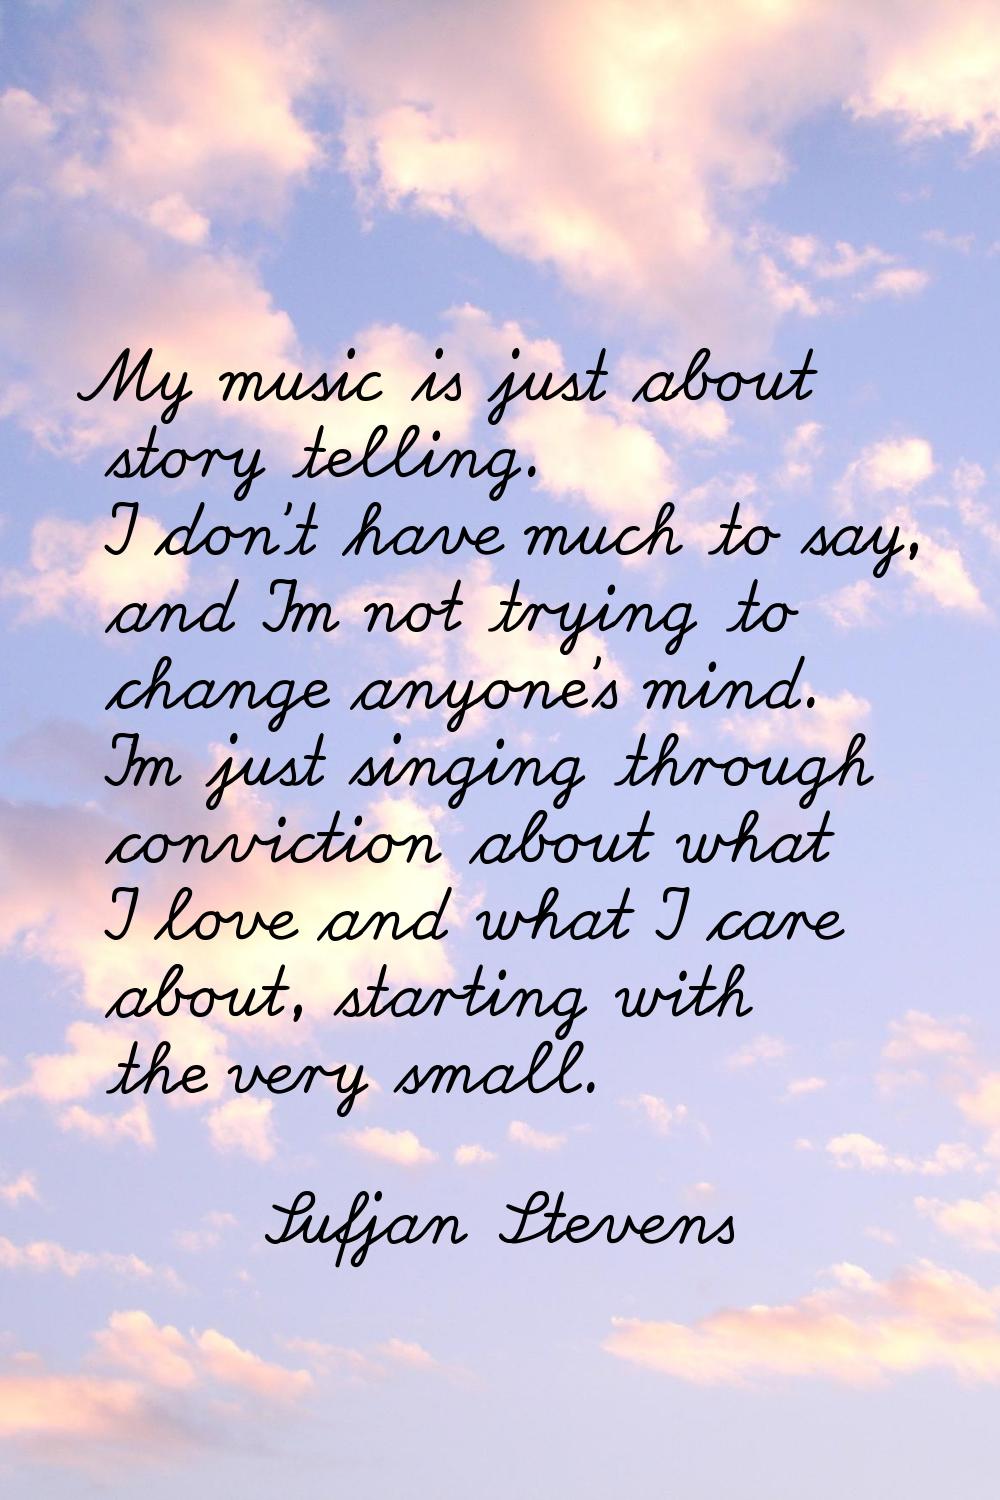 My music is just about story telling. I don't have much to say, and I'm not trying to change anyone